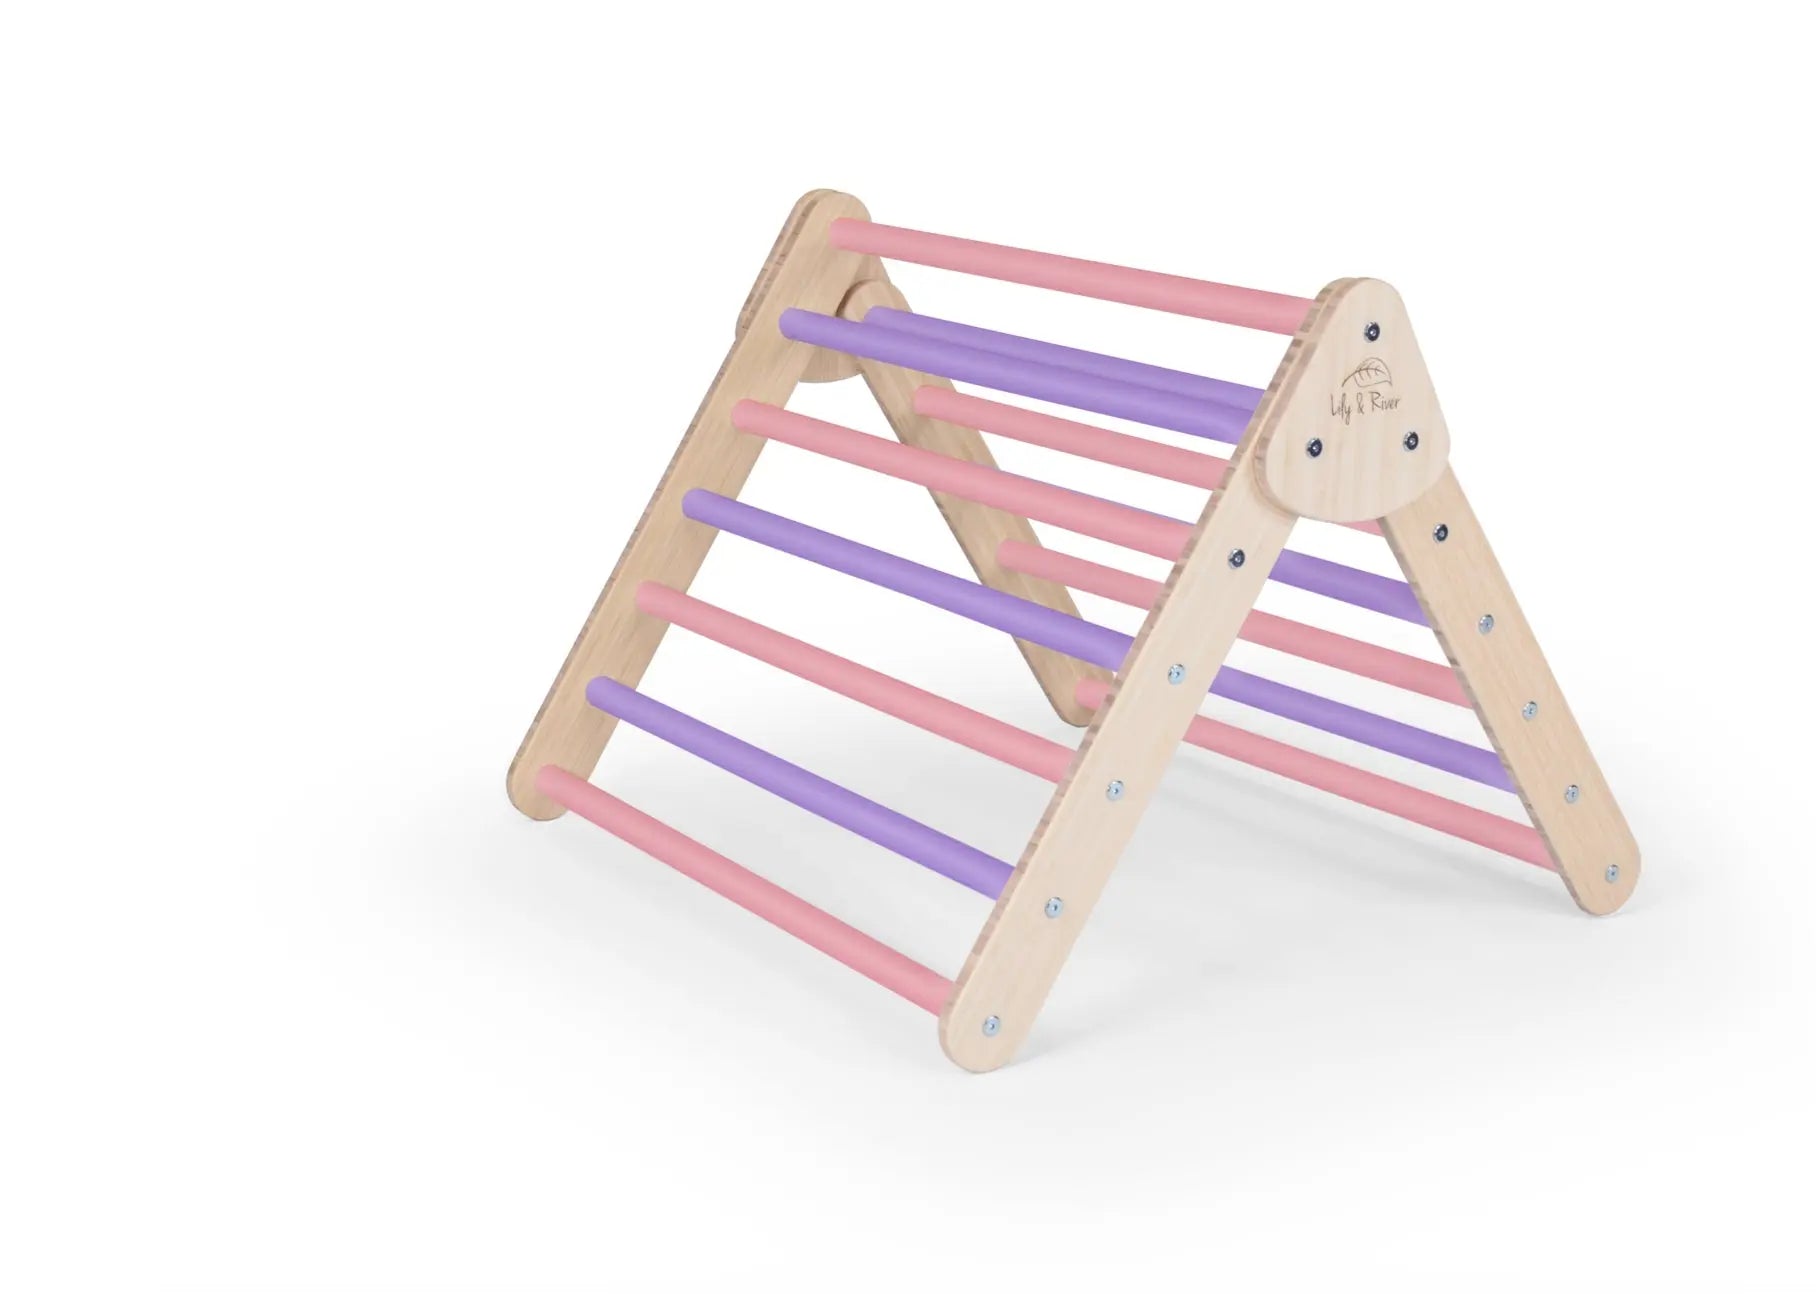 Lily & River Little Climber Pikler Triangle Pikler Triangles & Arches